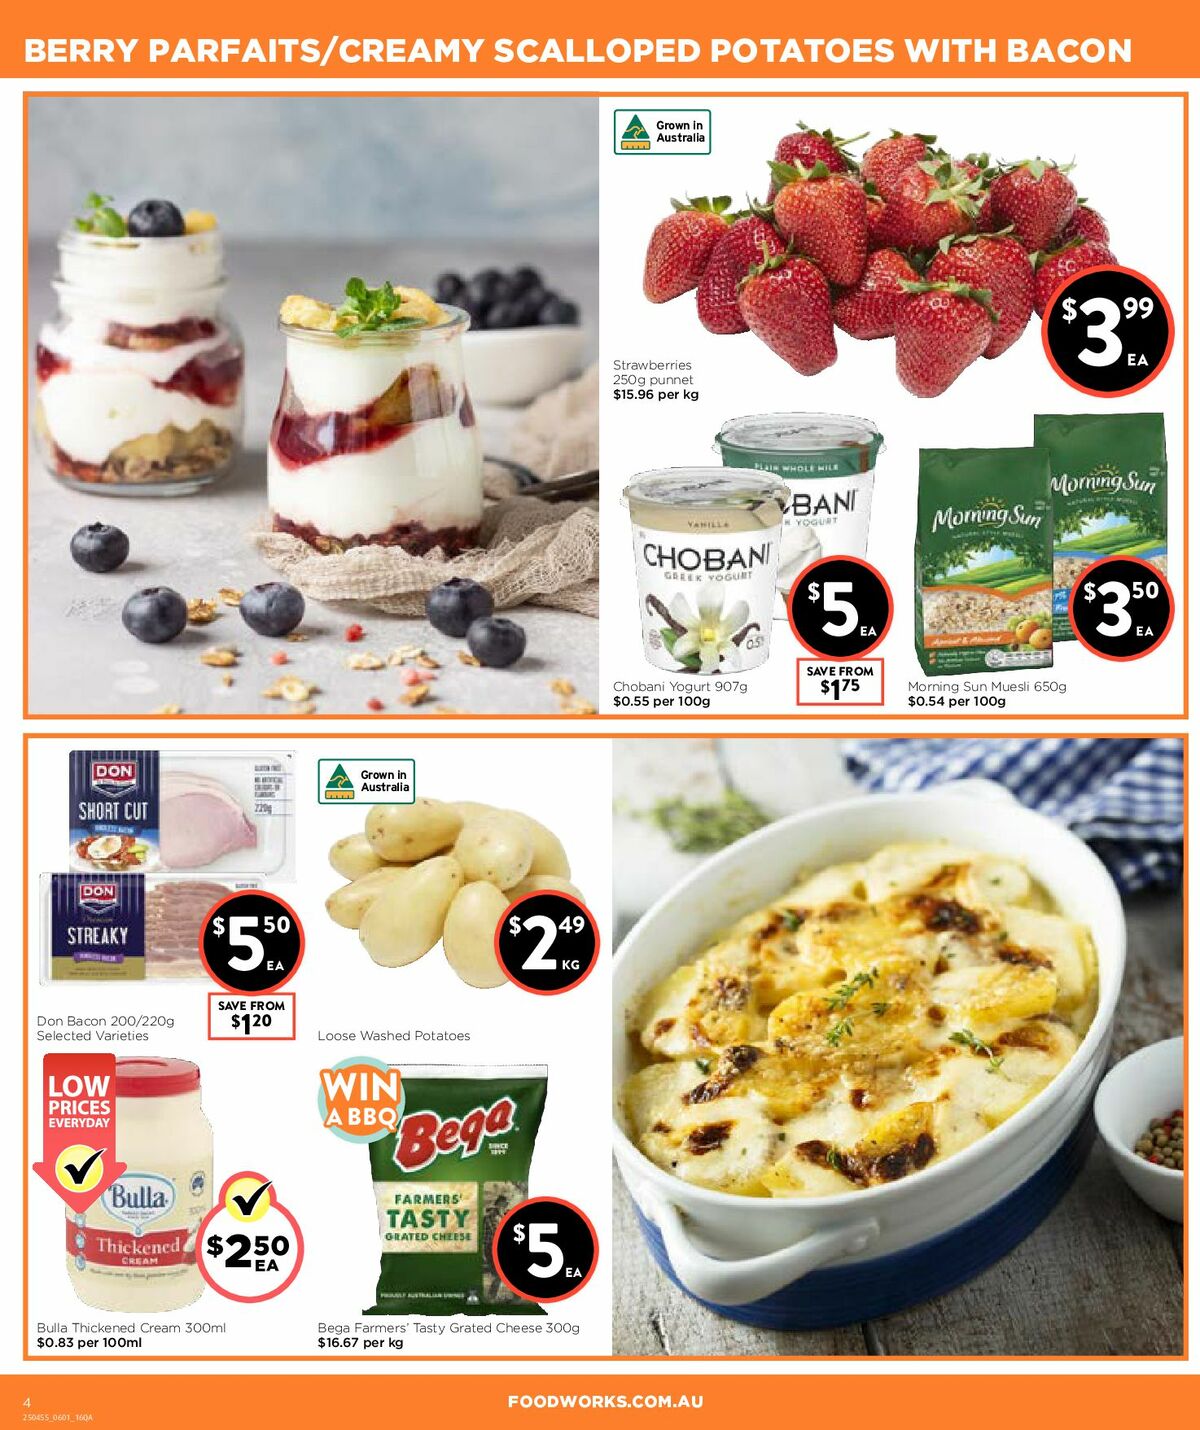 FoodWorks Supermarket Catalogues from 6 January